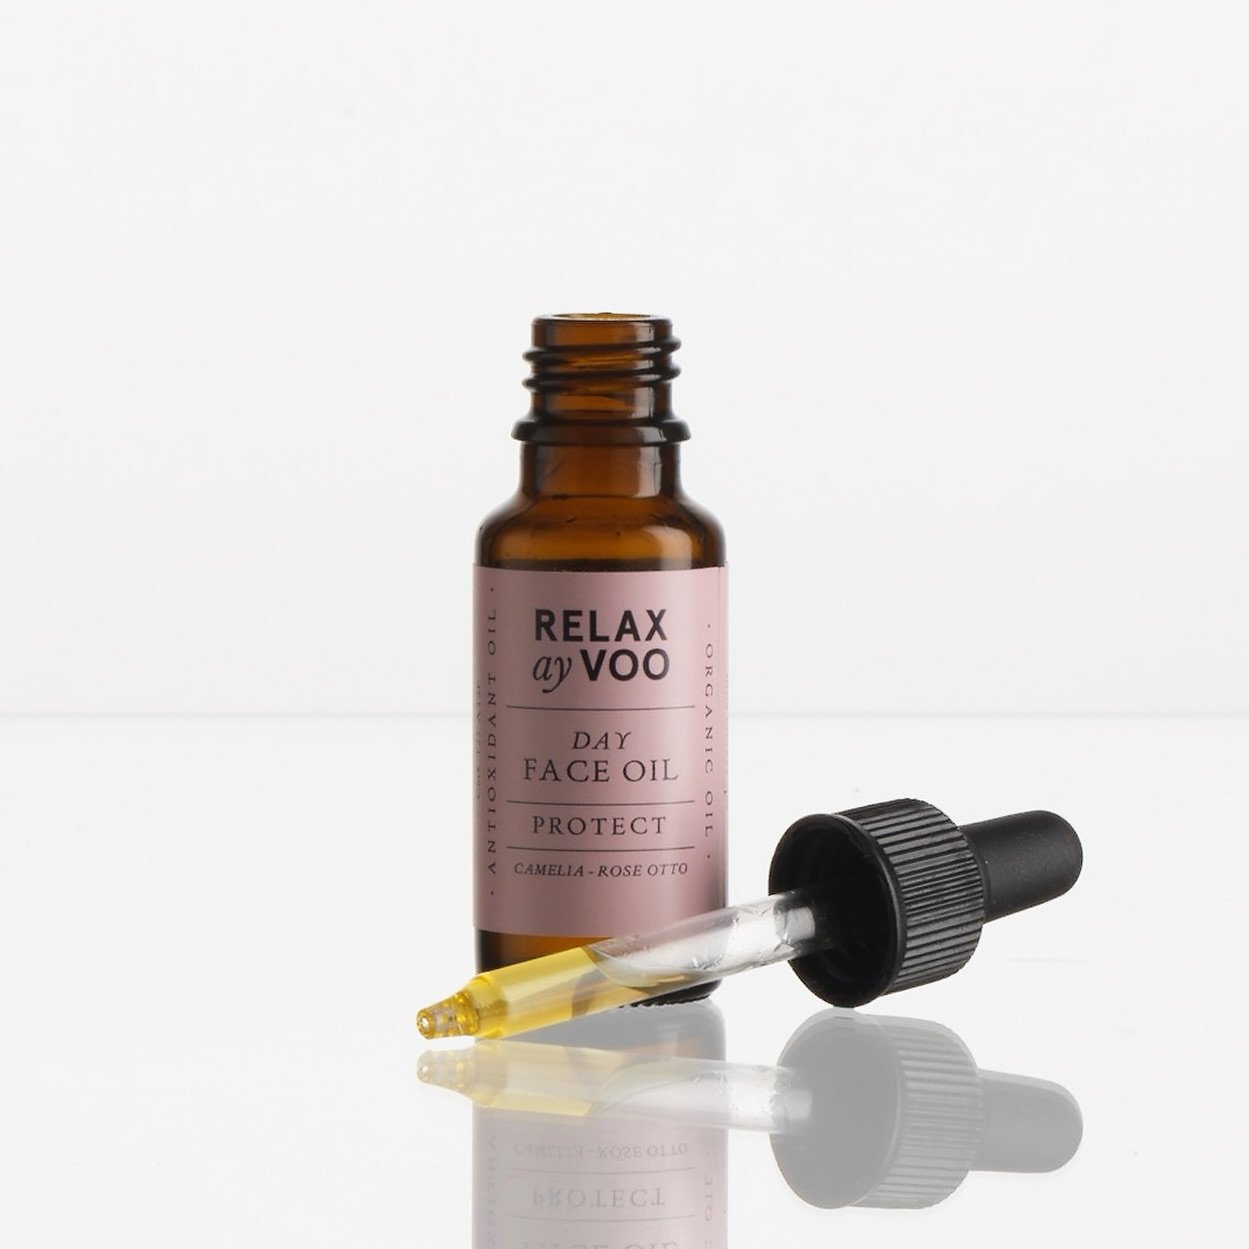 SINKS INTO THE SKIN

Facial oil is an outstanding alternative to traditional moisturisers. 💧 
Top tip: place 5 drops into your hands and warm the oil. Inhale deeply through the nose. 
For the best results, massage onto the skin thoroughly, ensuring 